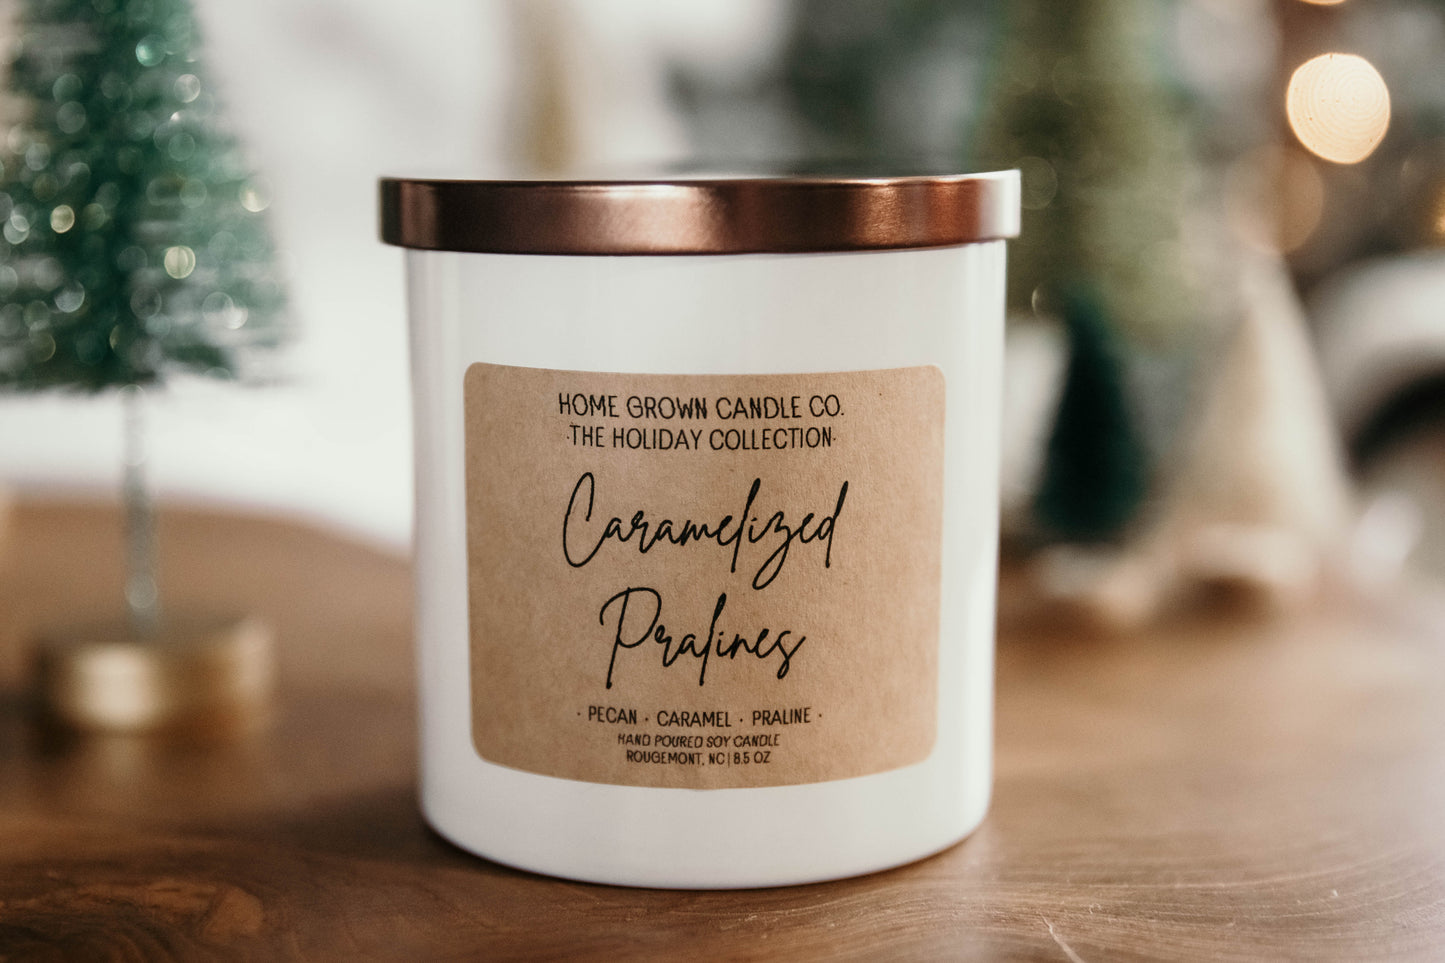 caramelized pralines scented candle